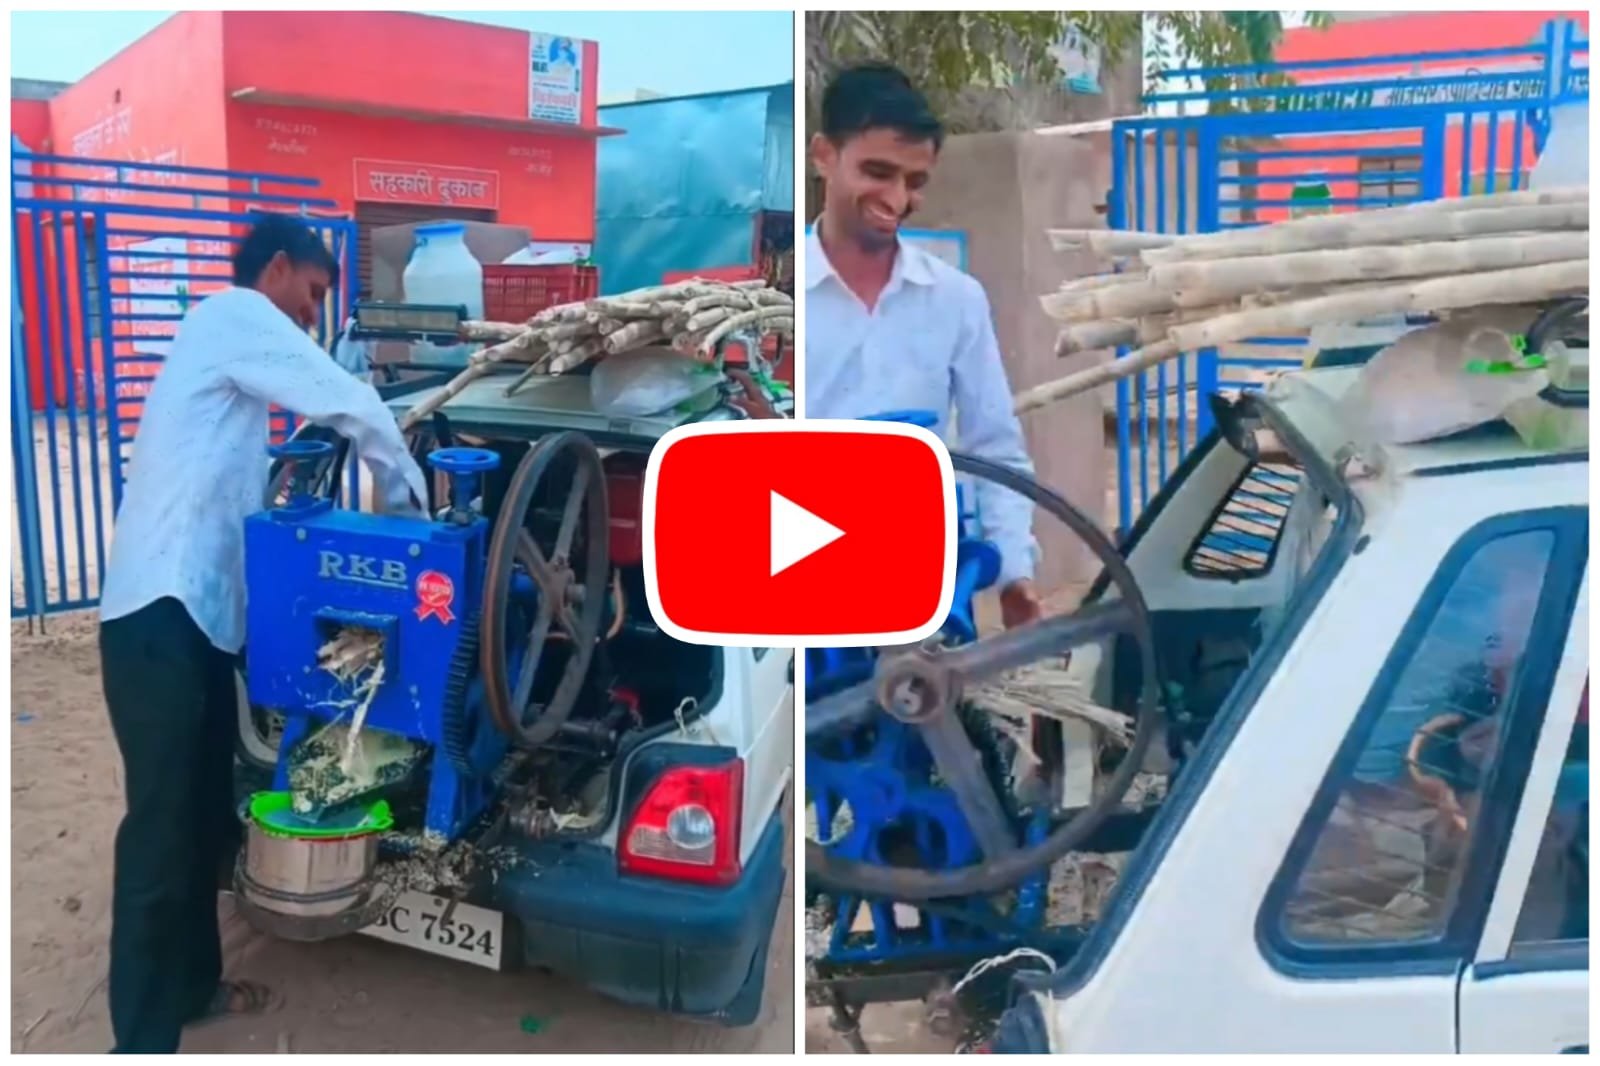 Jugaad Wali Car | Wow brother, the guy fitted a sugarcane juice machine in the car itself.